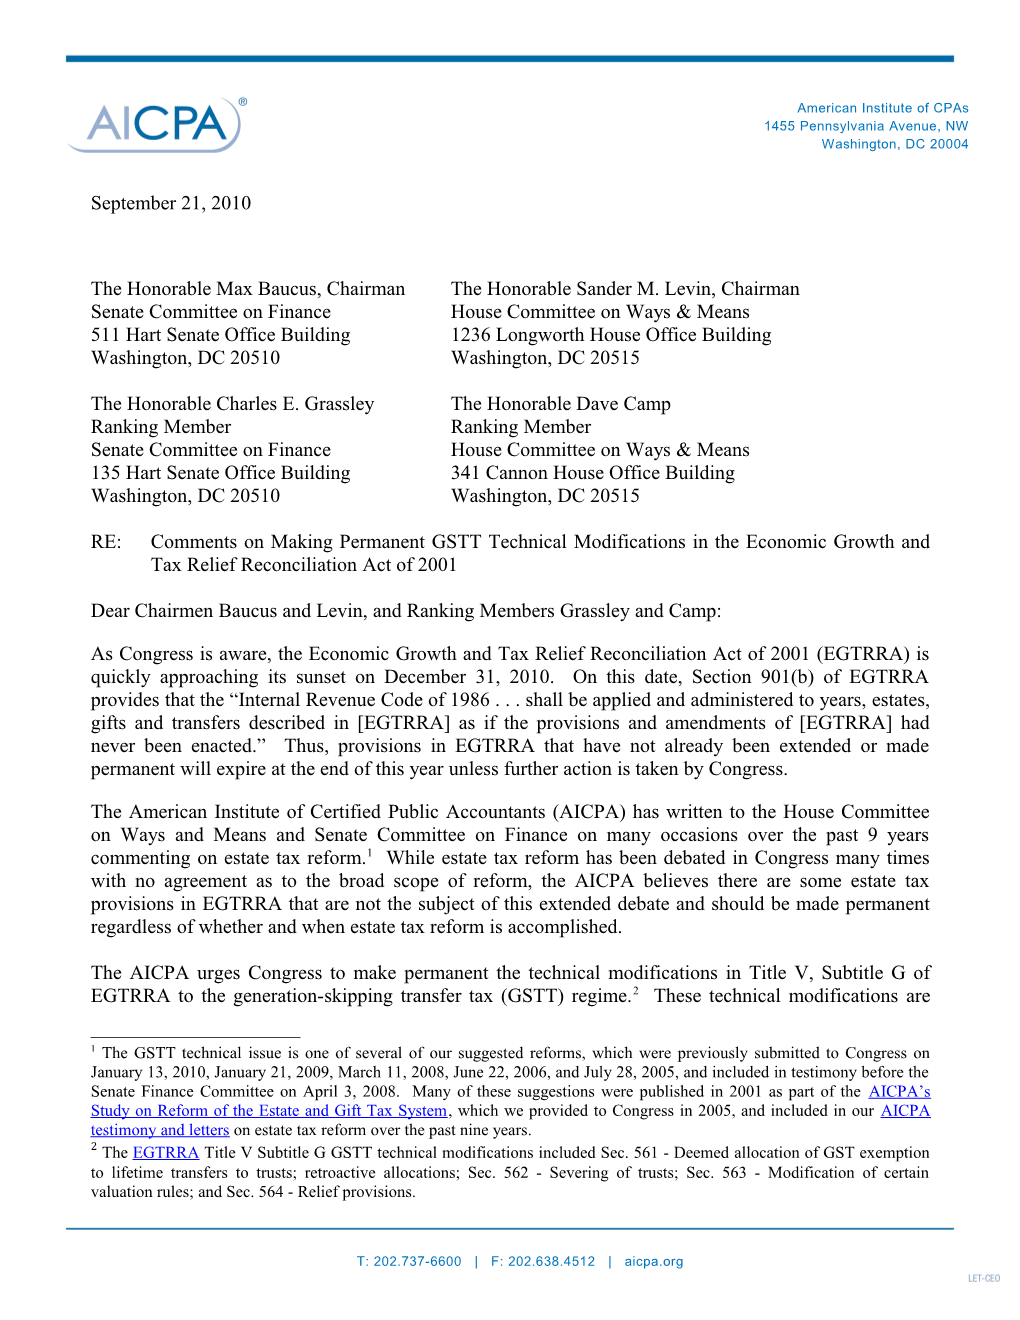 AICPA Letter to Congress on Making Permanent GSTT Technical Modifications from EGTRRA 2001